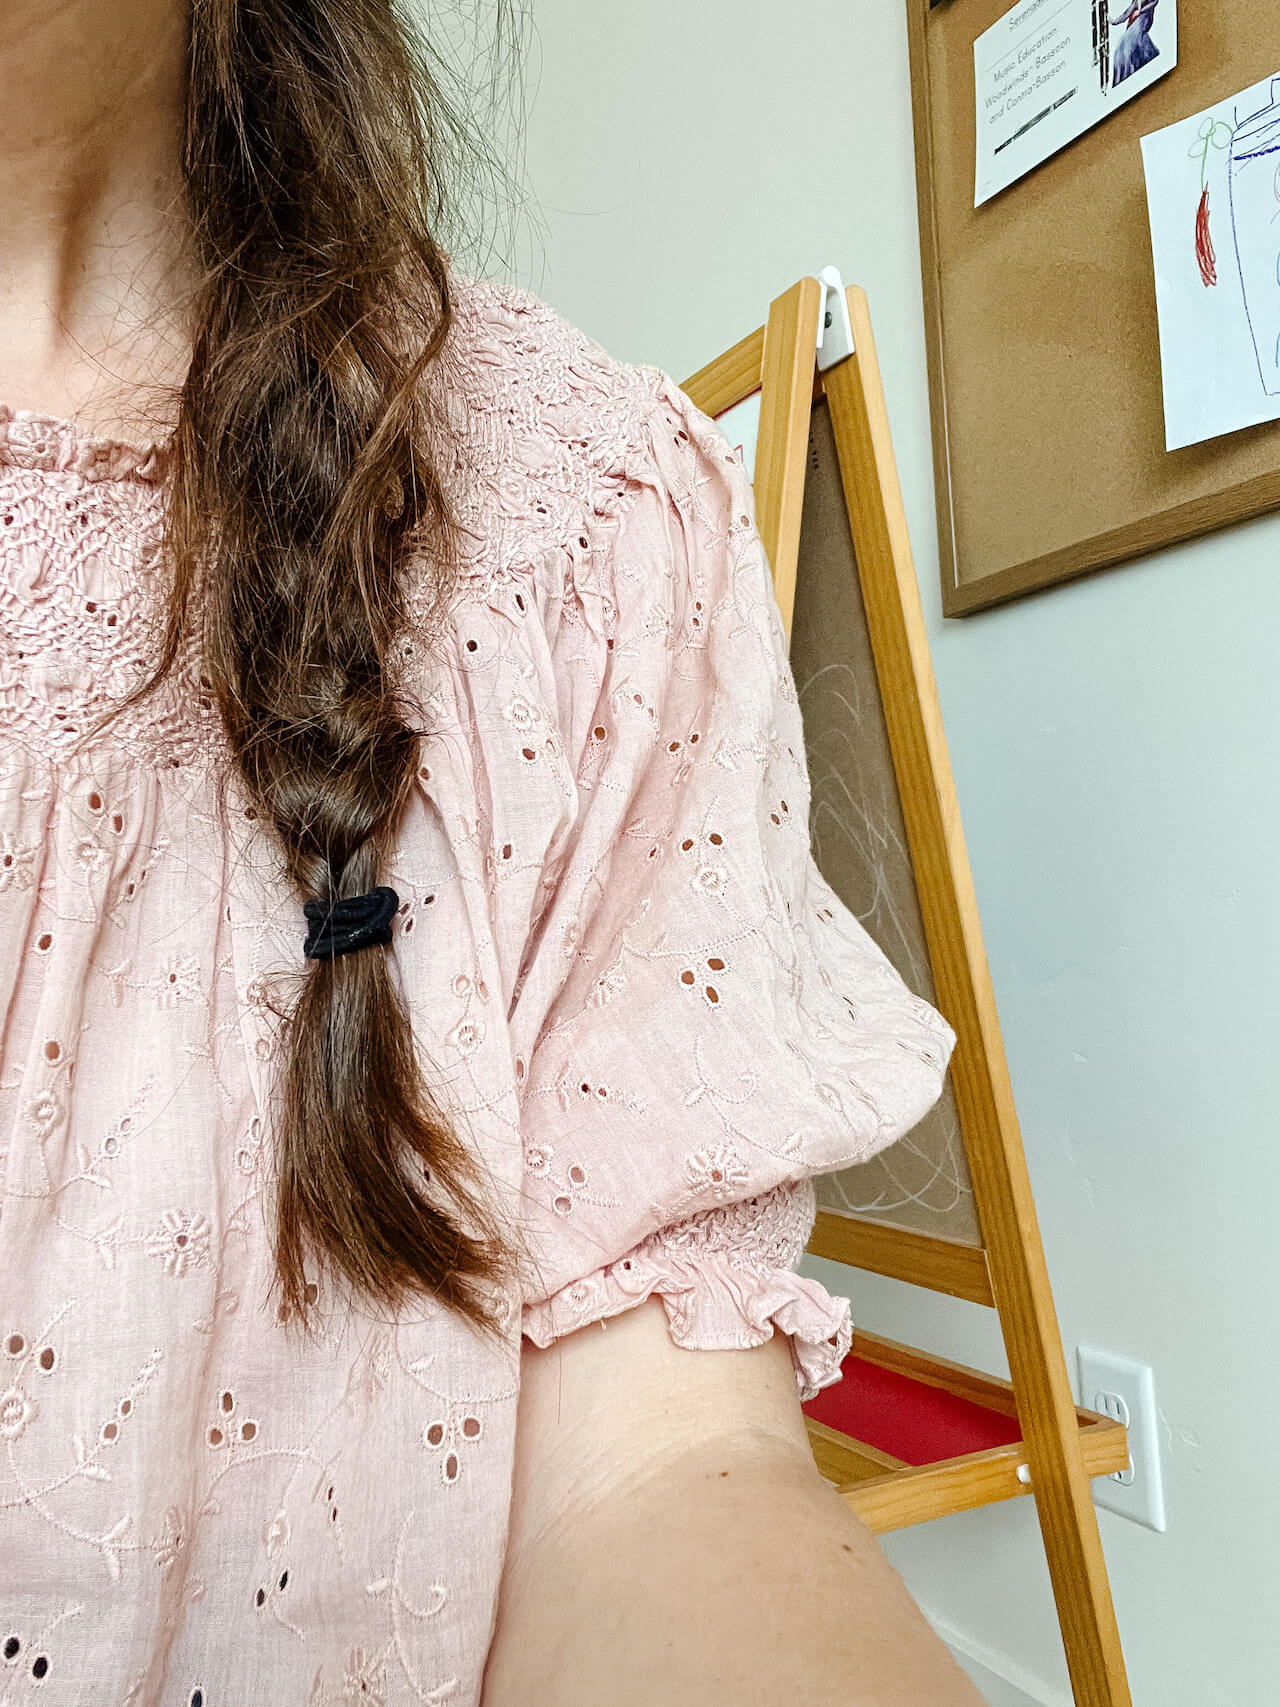 messy braid and doen blouse - M Loves M @marmar